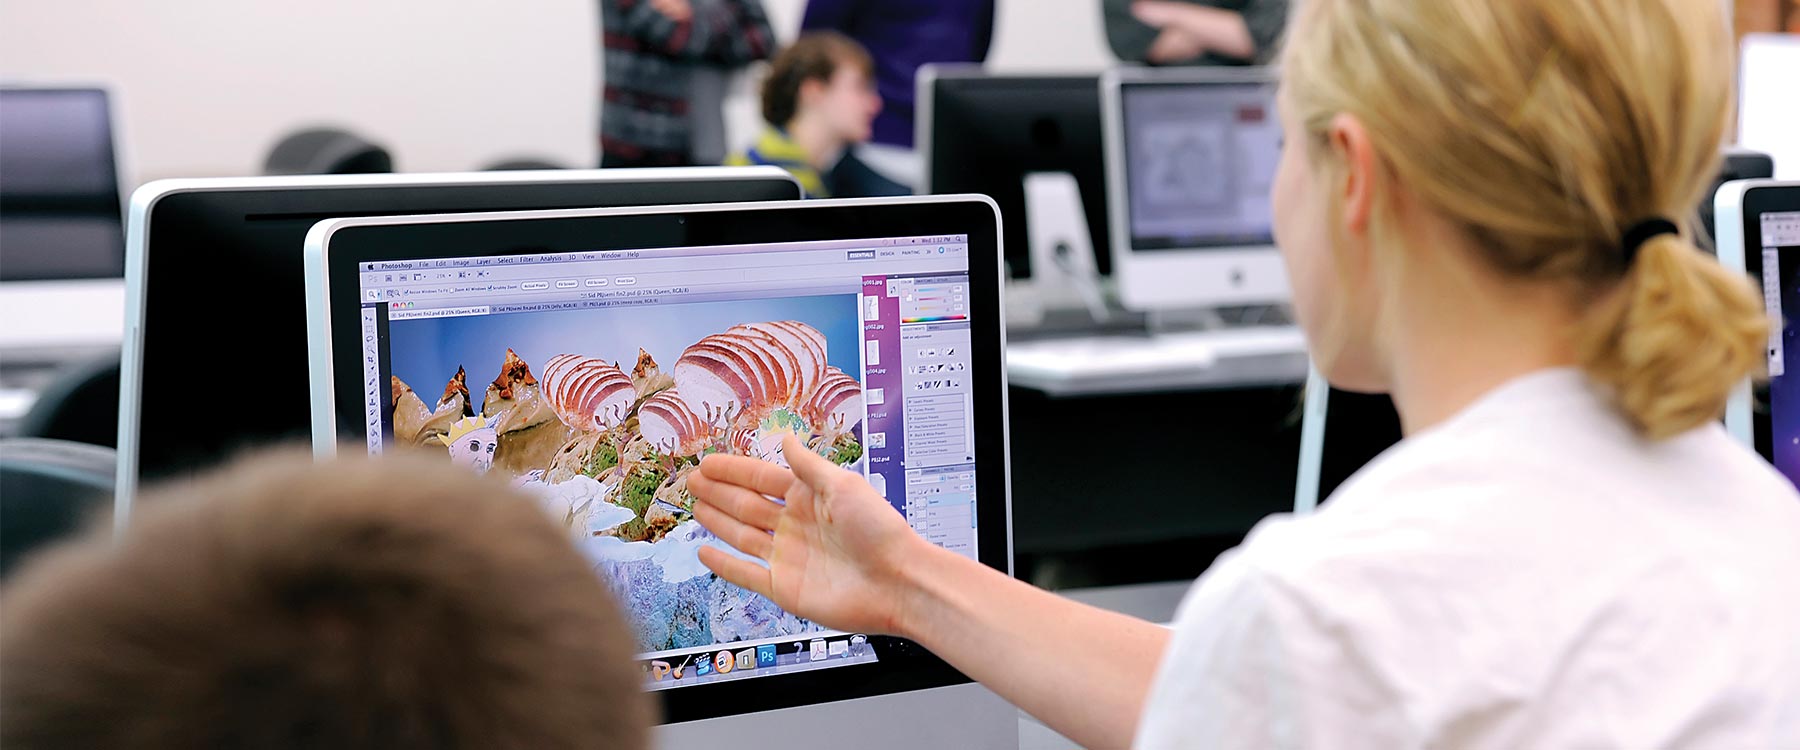 A student points to a computer screen. On the screen is an eclectic and colorful design.